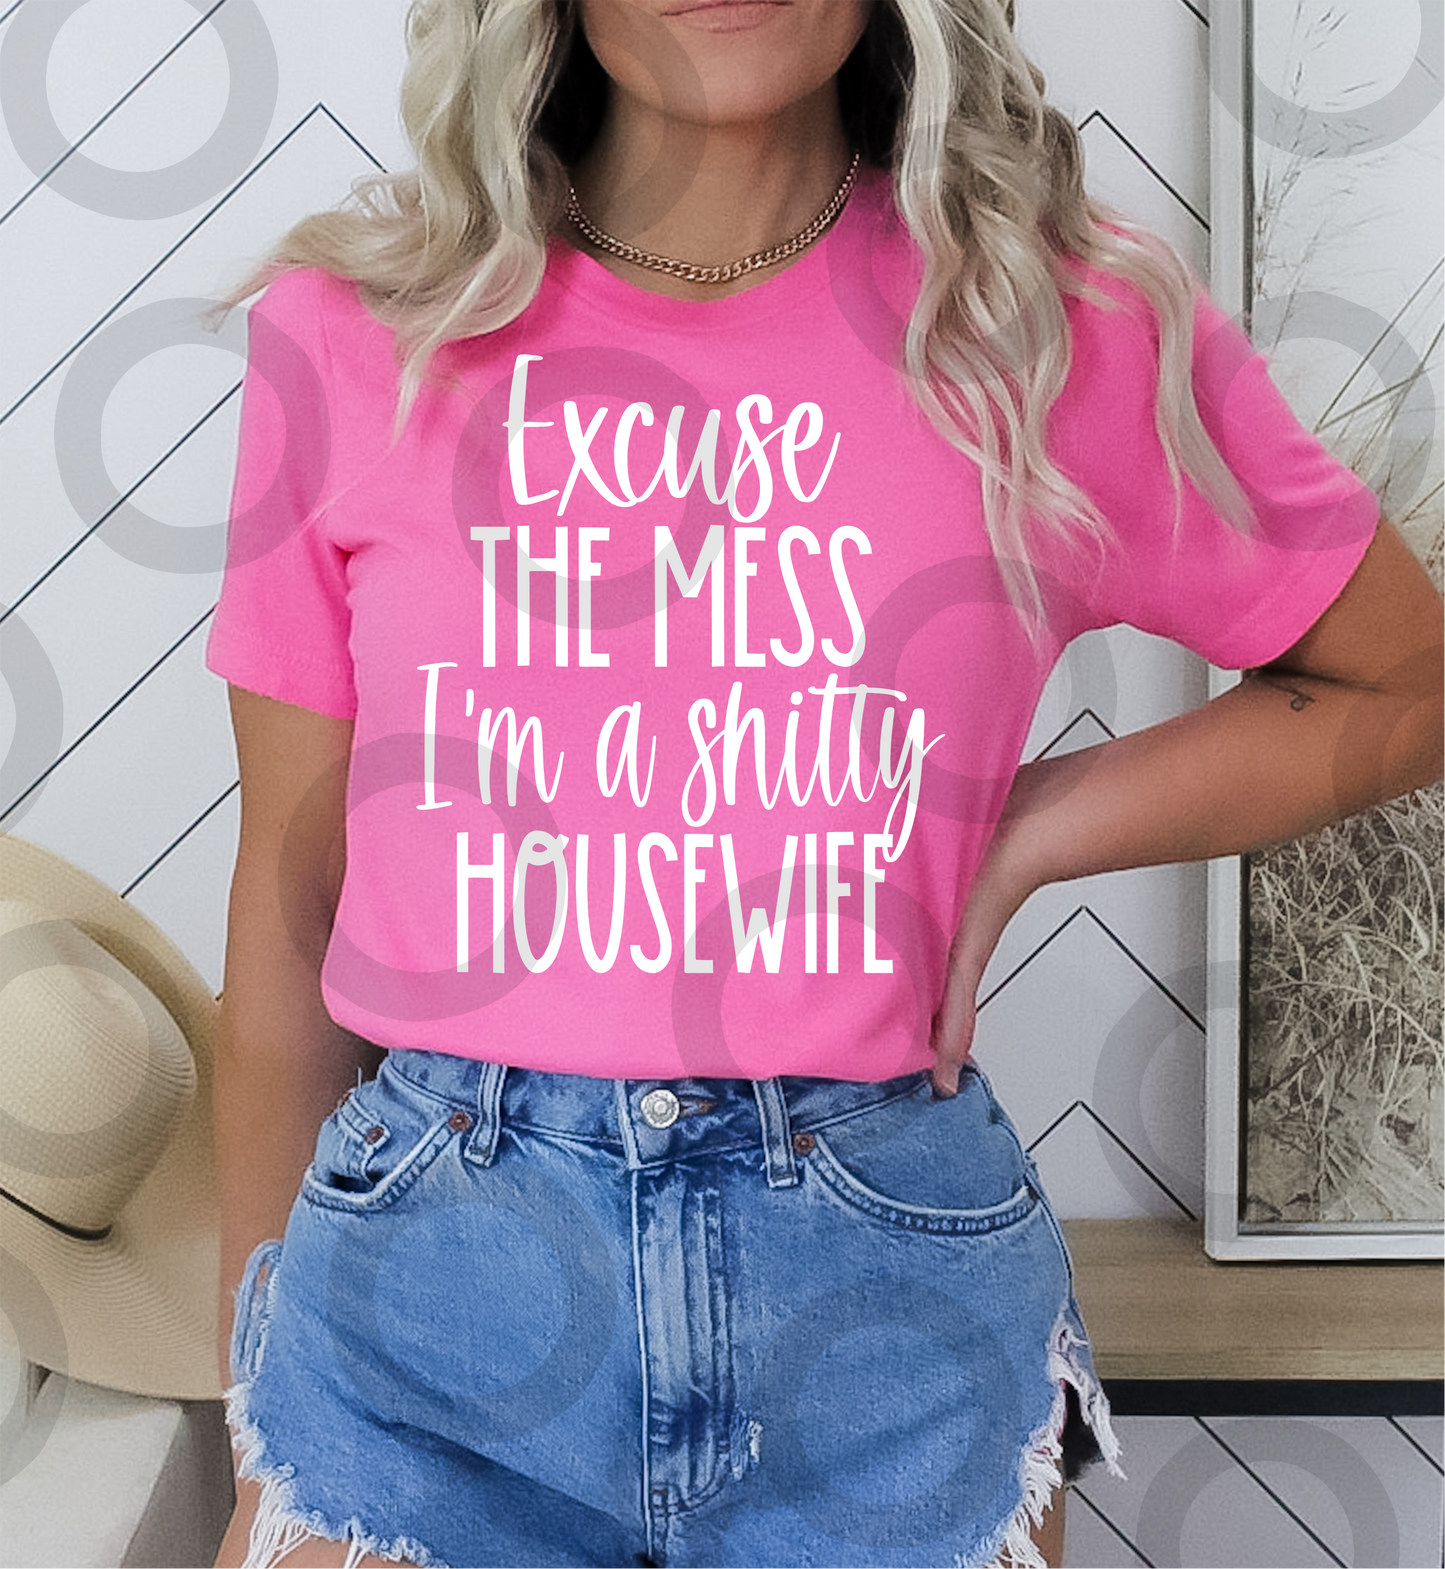 Excuse the mess I'm a shitty housewife SINGLE COLOR WHITE  size ADULT  DTF TRANSFERPRINT TO ORDER